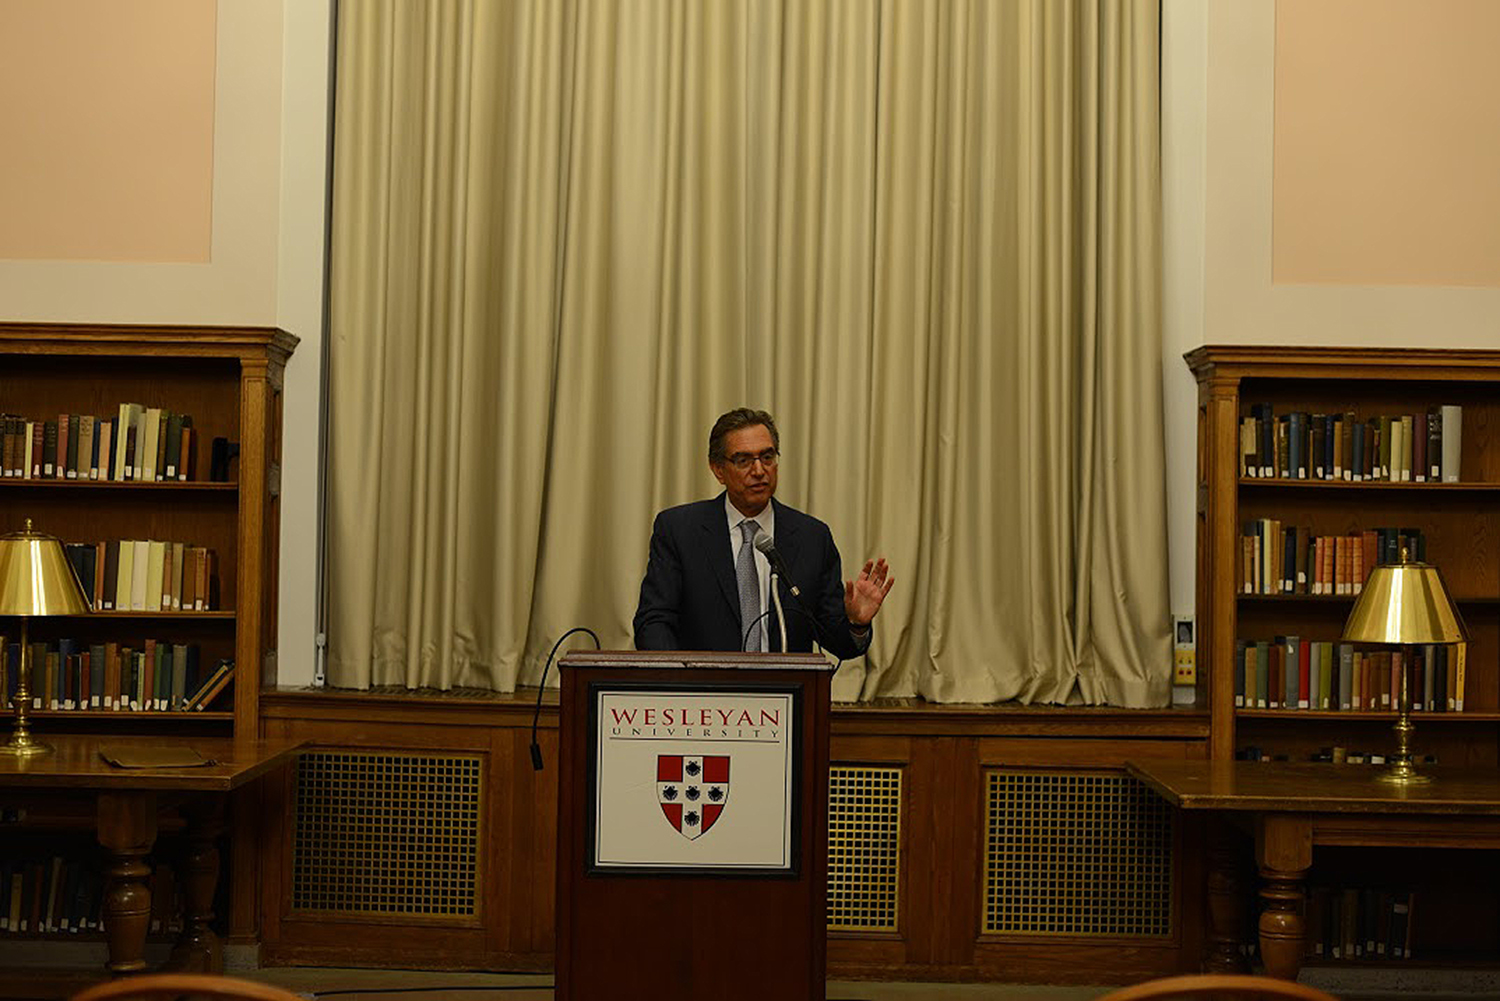 David Rabban '71 spoke on “Free Speech, Academic Freedom, and the American University” during Wesleyan's annual Constitution Day Lecture Sept. 17 in the Smith Reading Room.